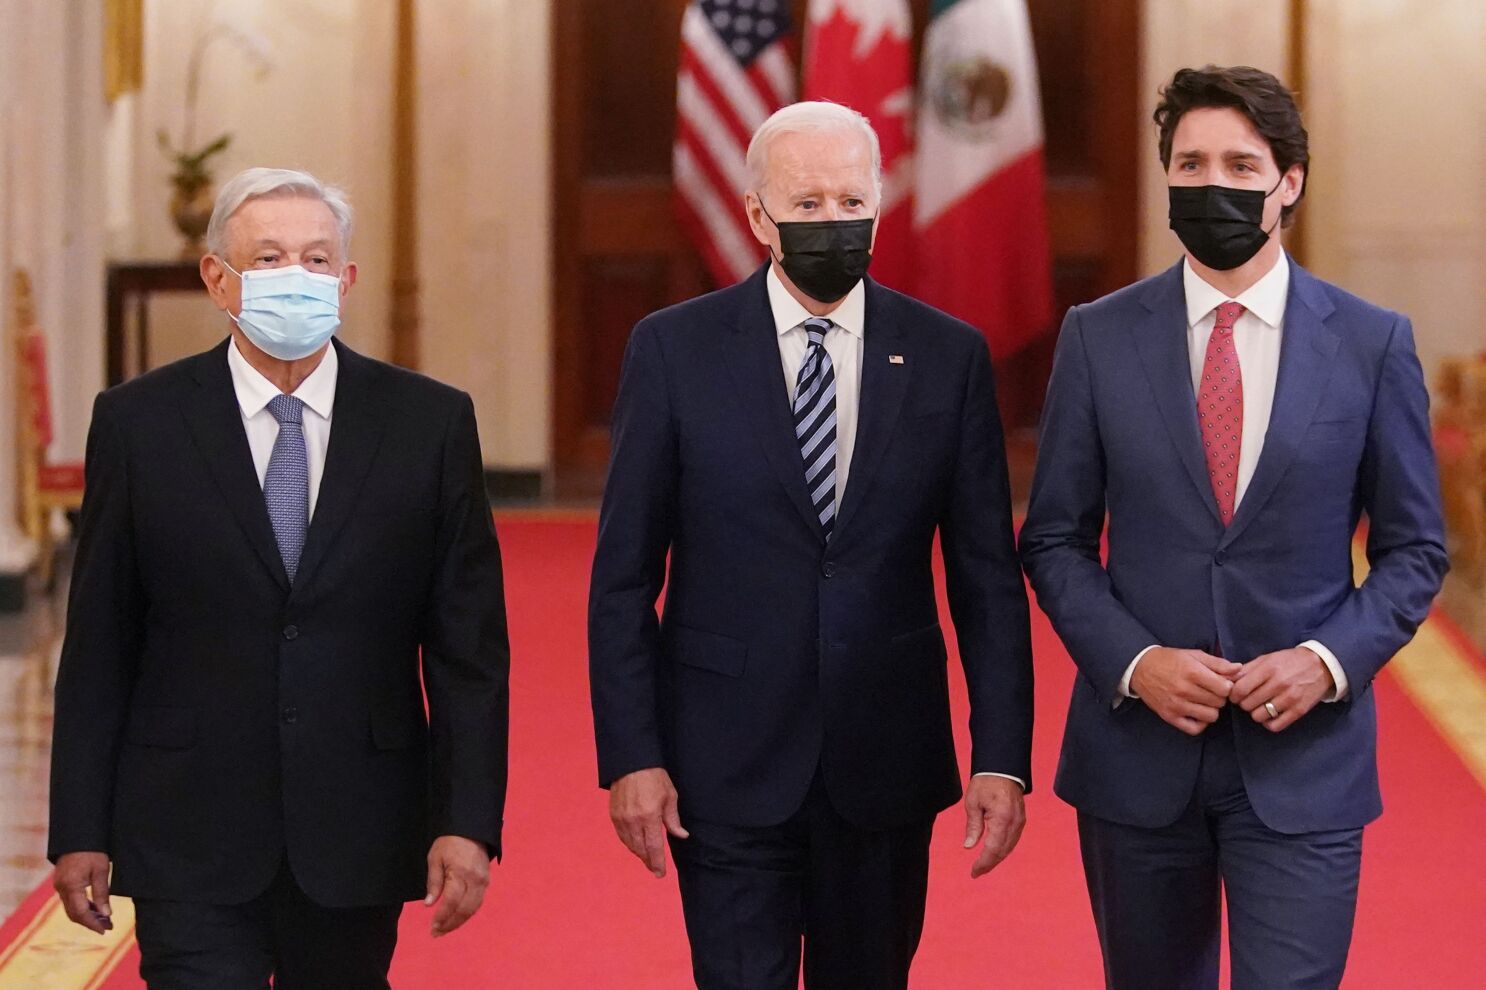 2022 Summit of the Americas